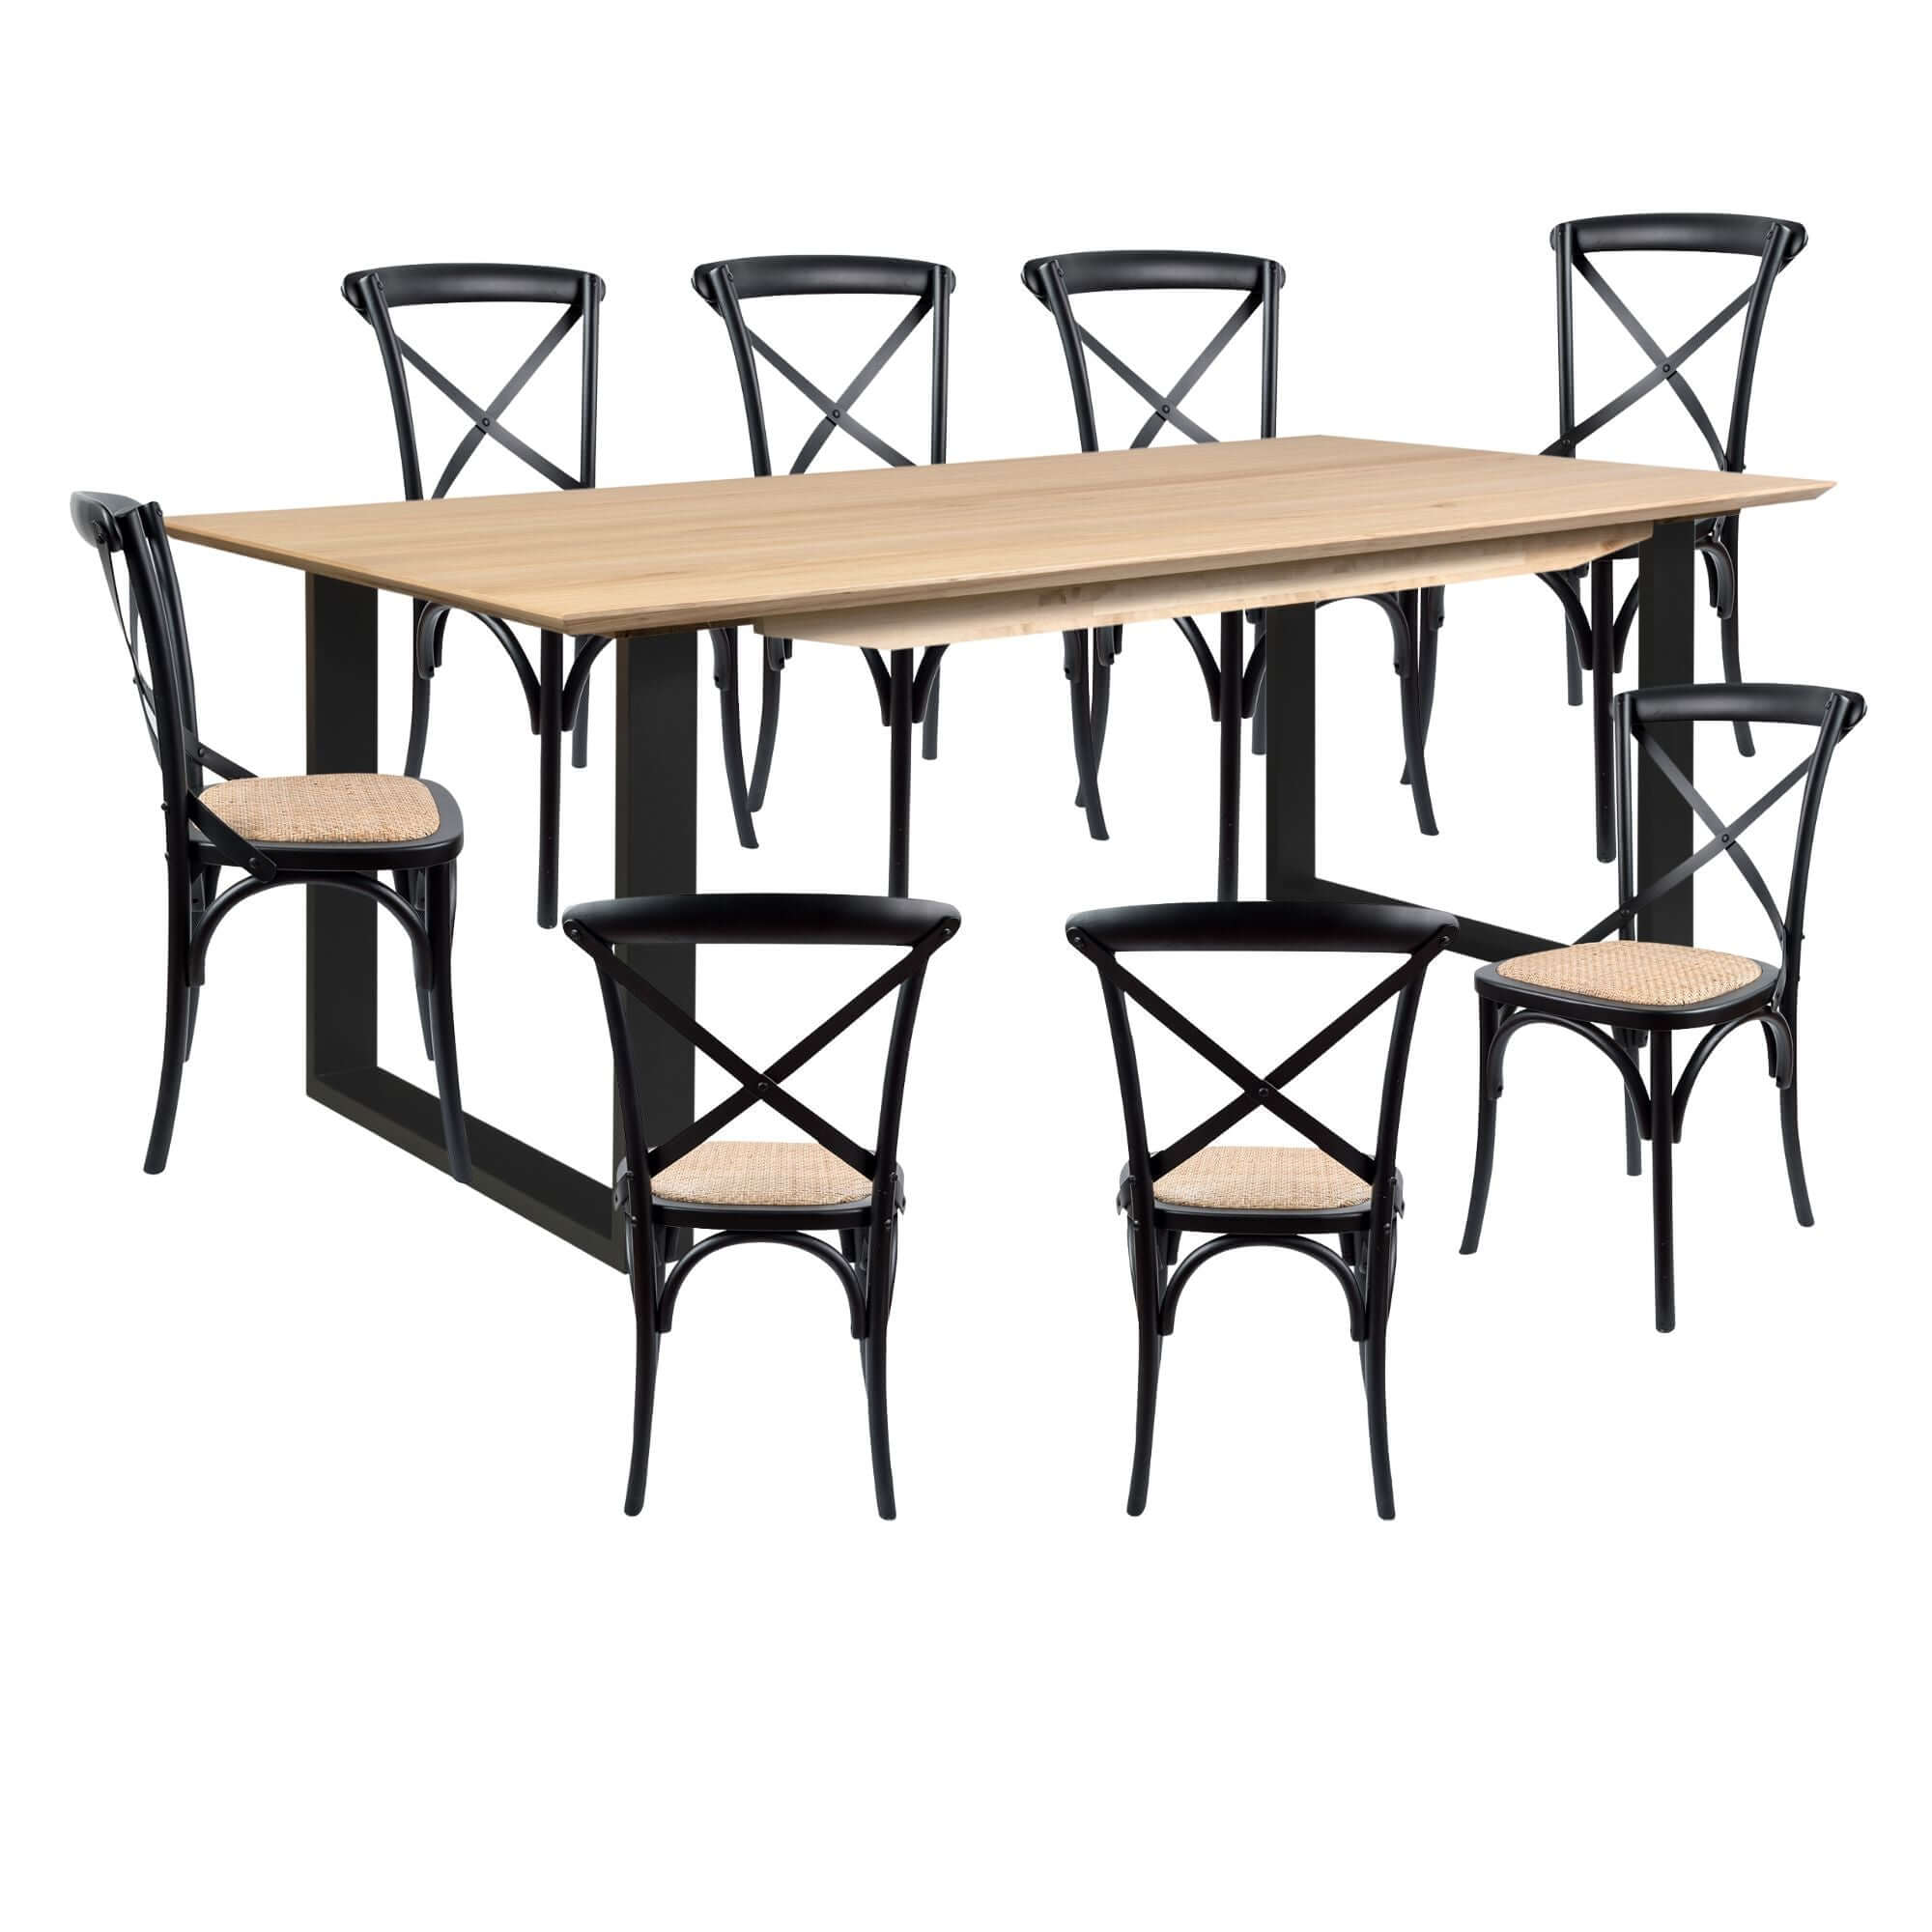 Aconite 9pc 210cm Dining Table Set 8 Cross Back Chair Solid Messmate Timber Wood-Upinteriors